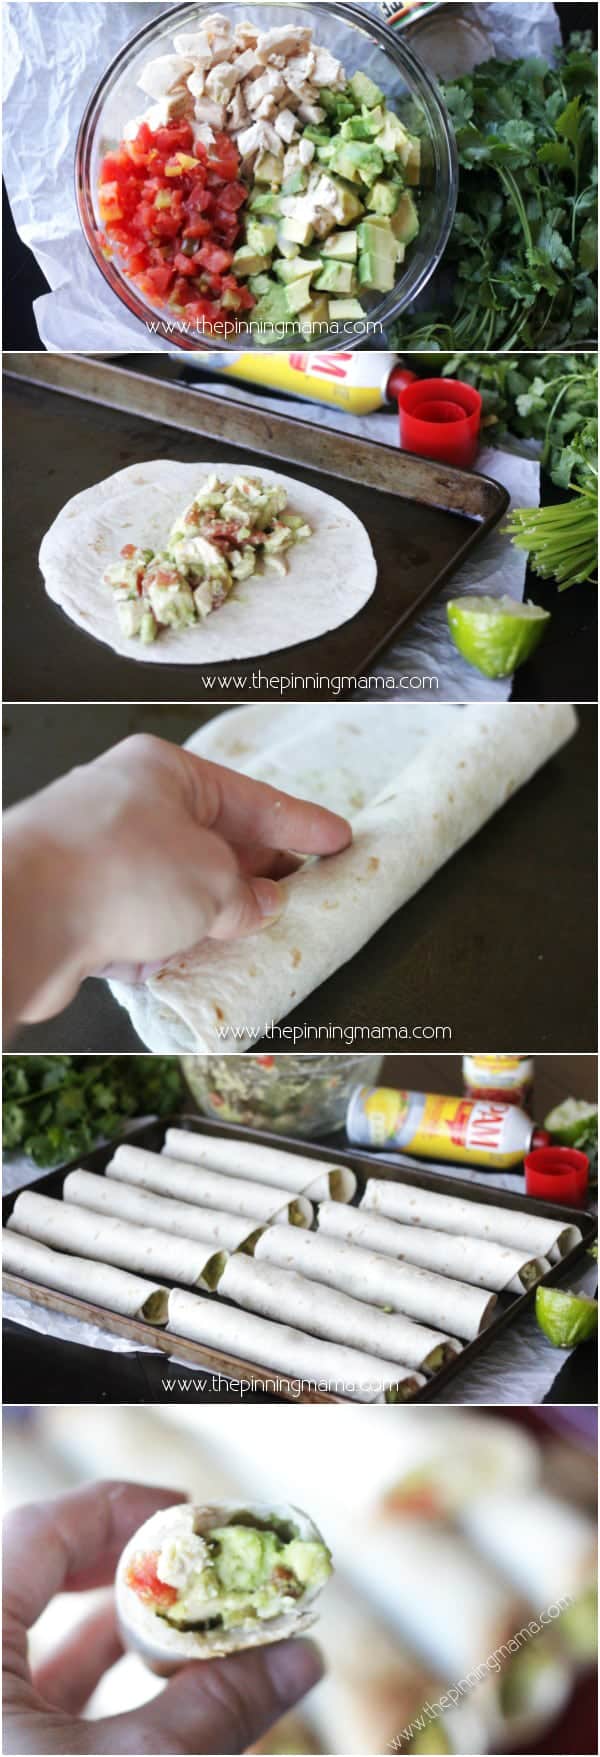 Who knew it was so easy to make taquitos! Making them in the oven makes this comfort food much healthier too. Chicken, avocado and lime are so delicious in this recipe!